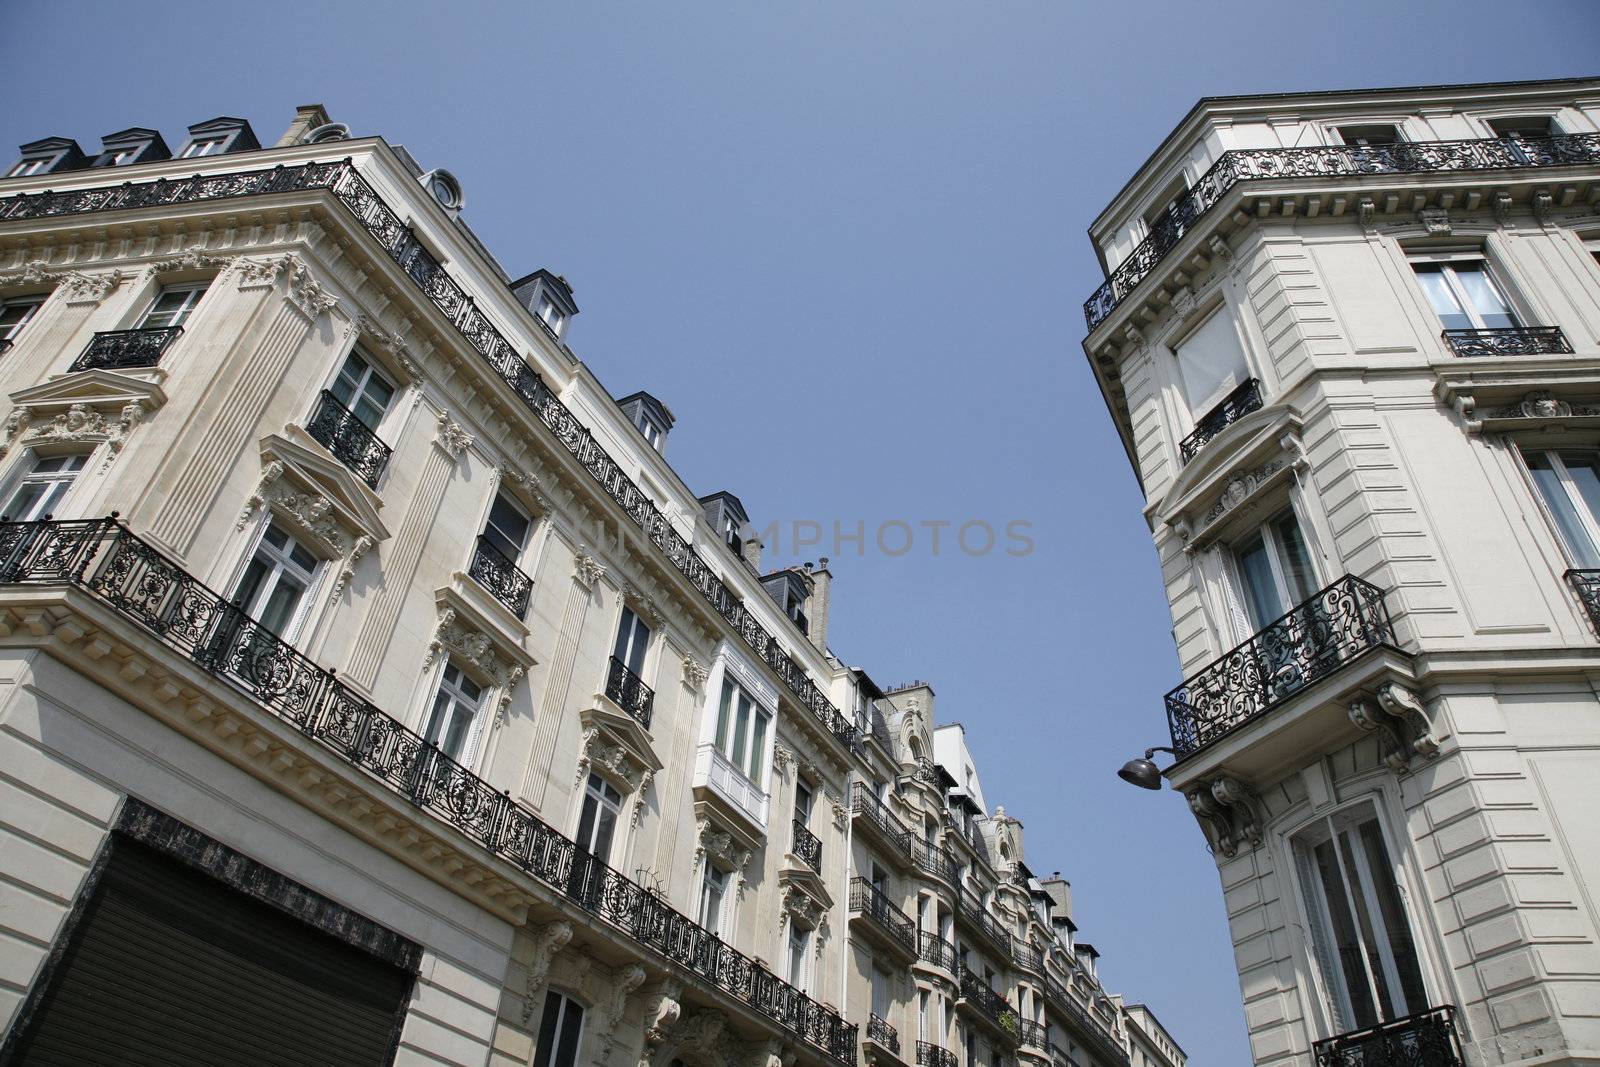 Luxury condos seen from Champs-Elysees, Paris, France